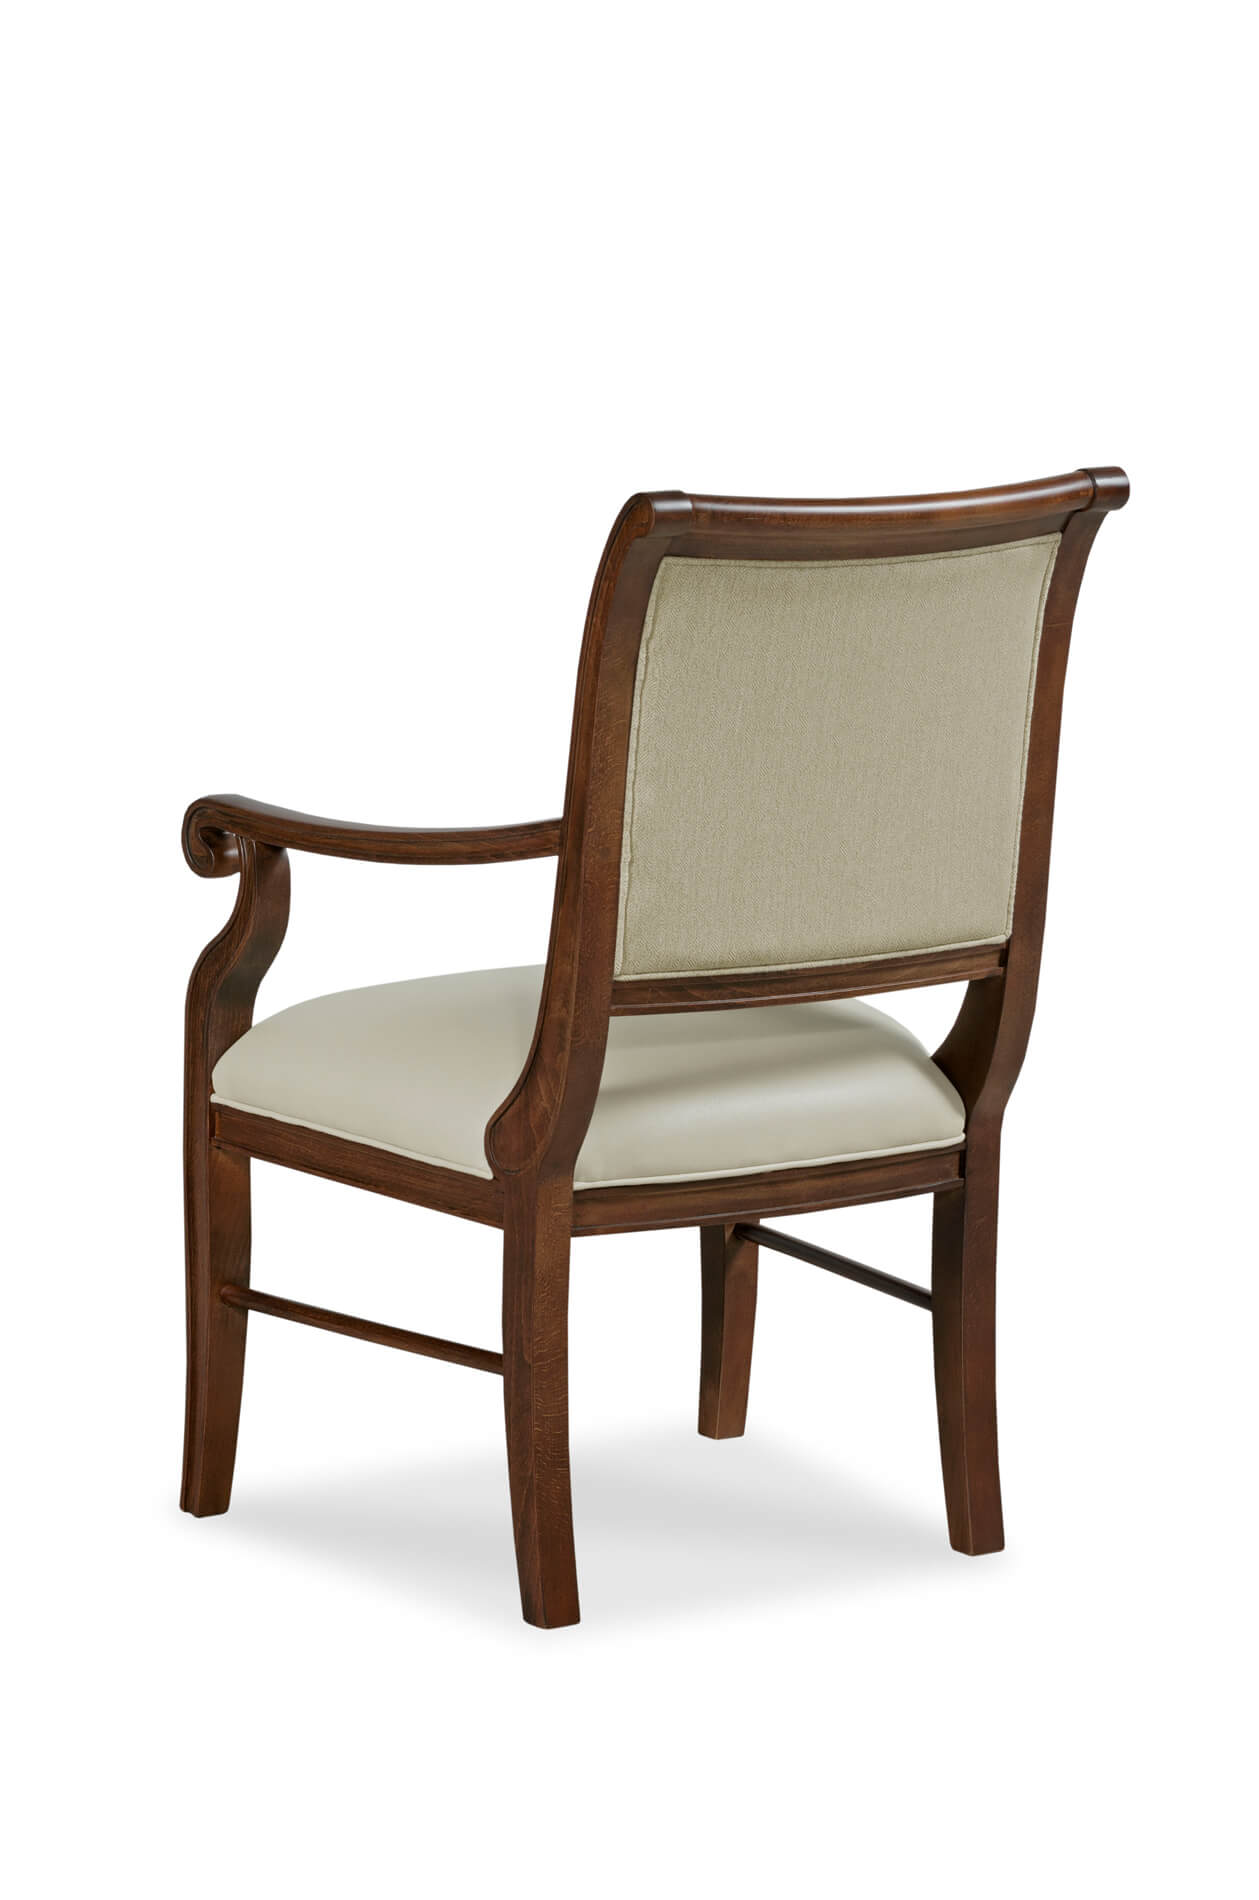 Buy Fairfield's Emmett Upholstered Dining Arm Chair - Free Shipping!